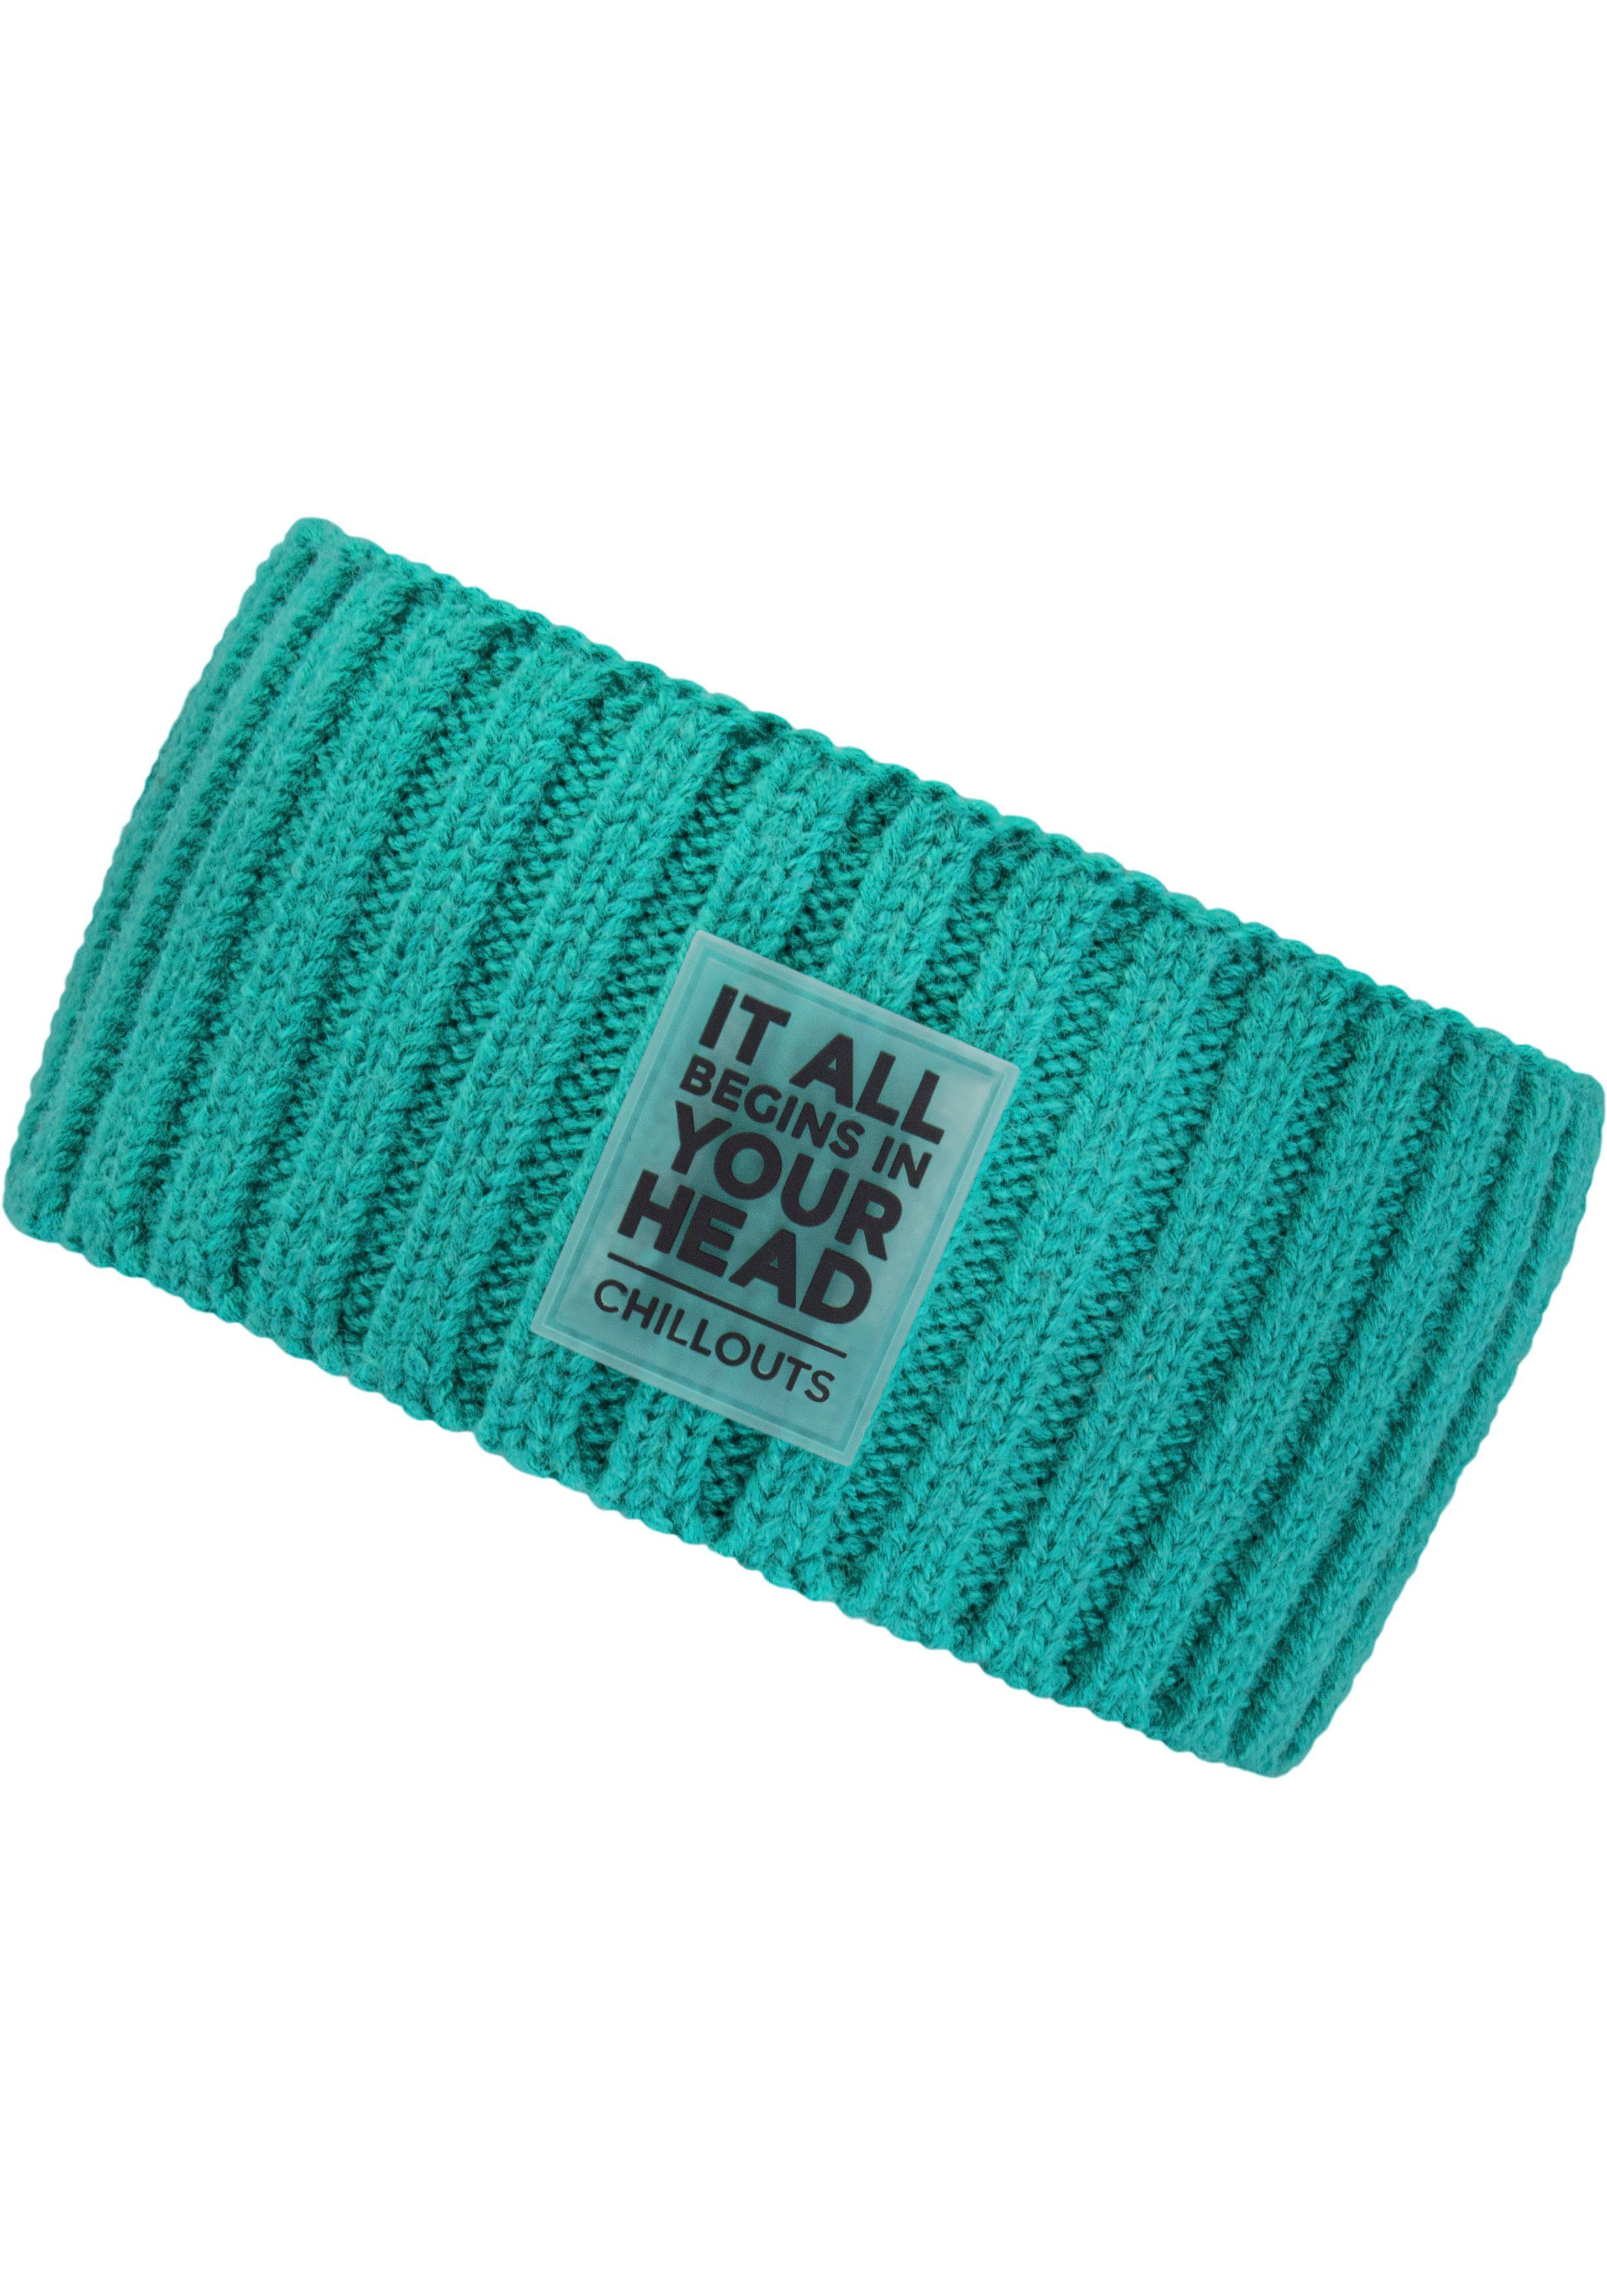 Trendiges turquoise Stirnband Zoe Headband chillouts Design